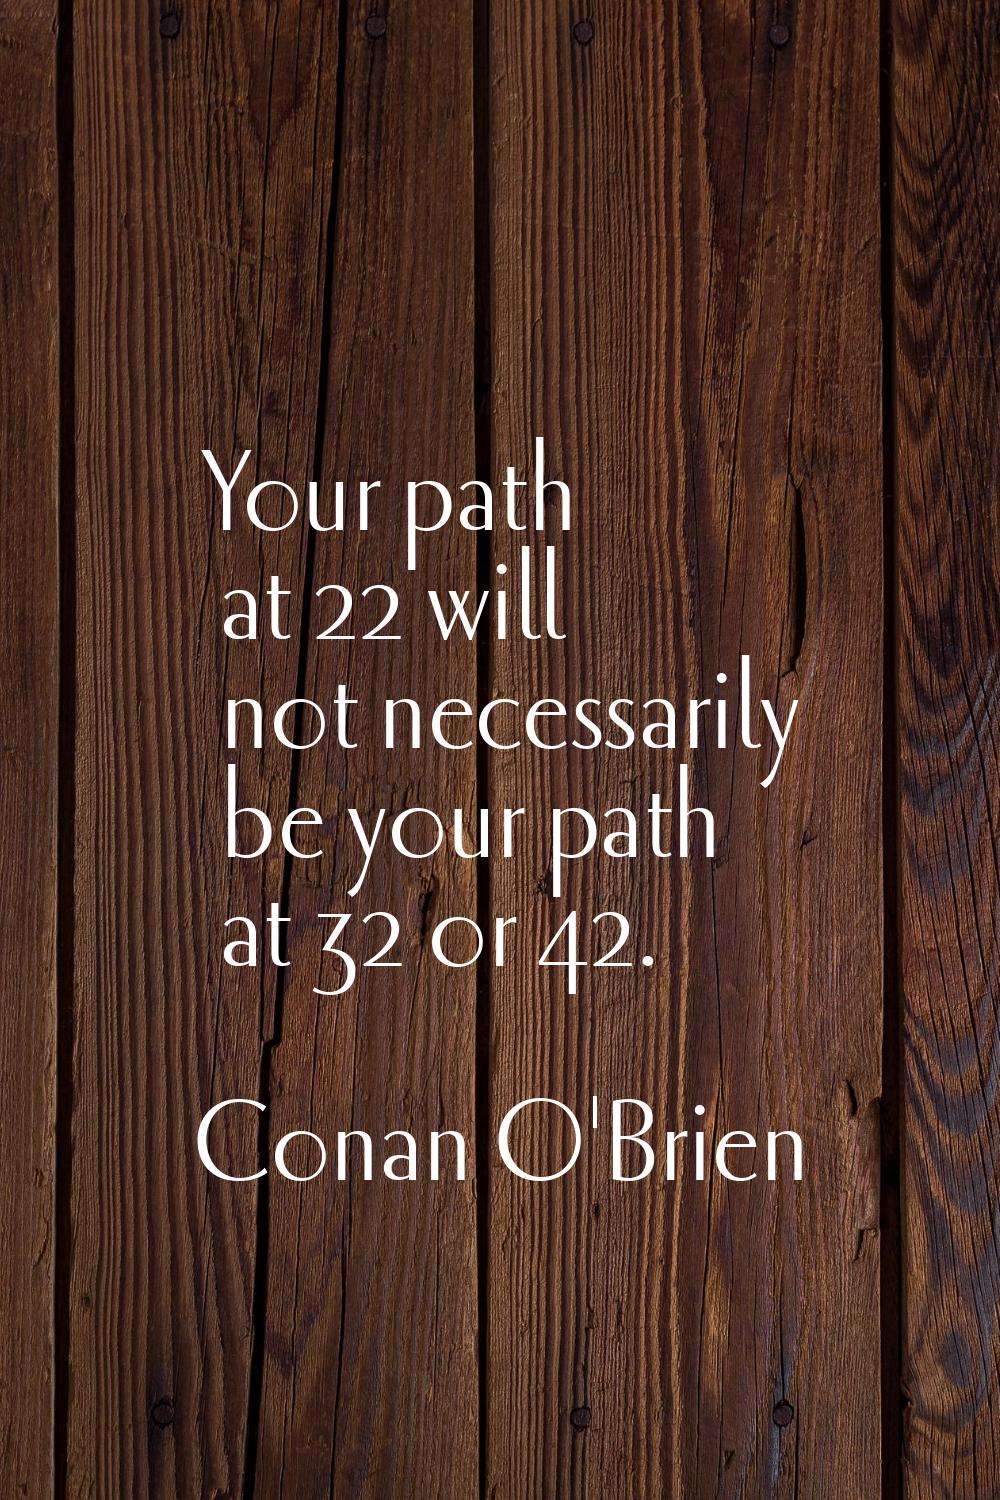 Your path at 22 will not necessarily be your path at 32 or 42.